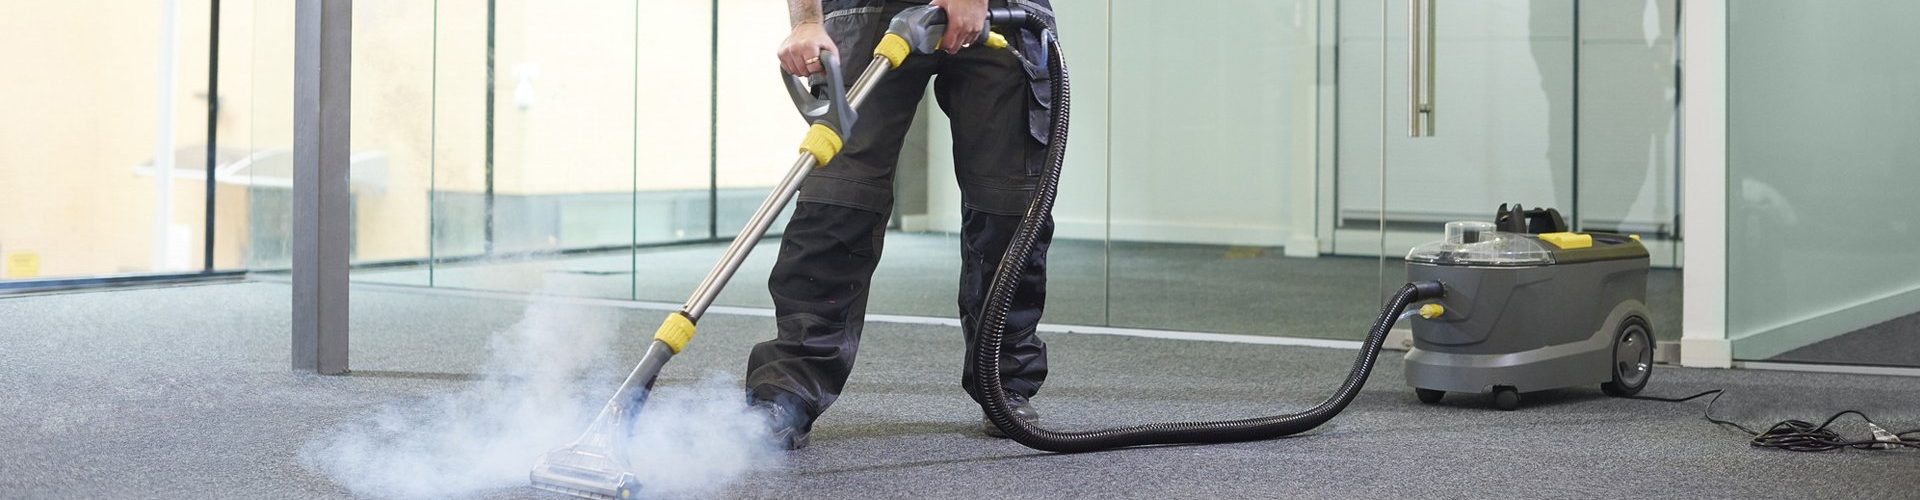 Which are the 3 worst carpet stains to remove?